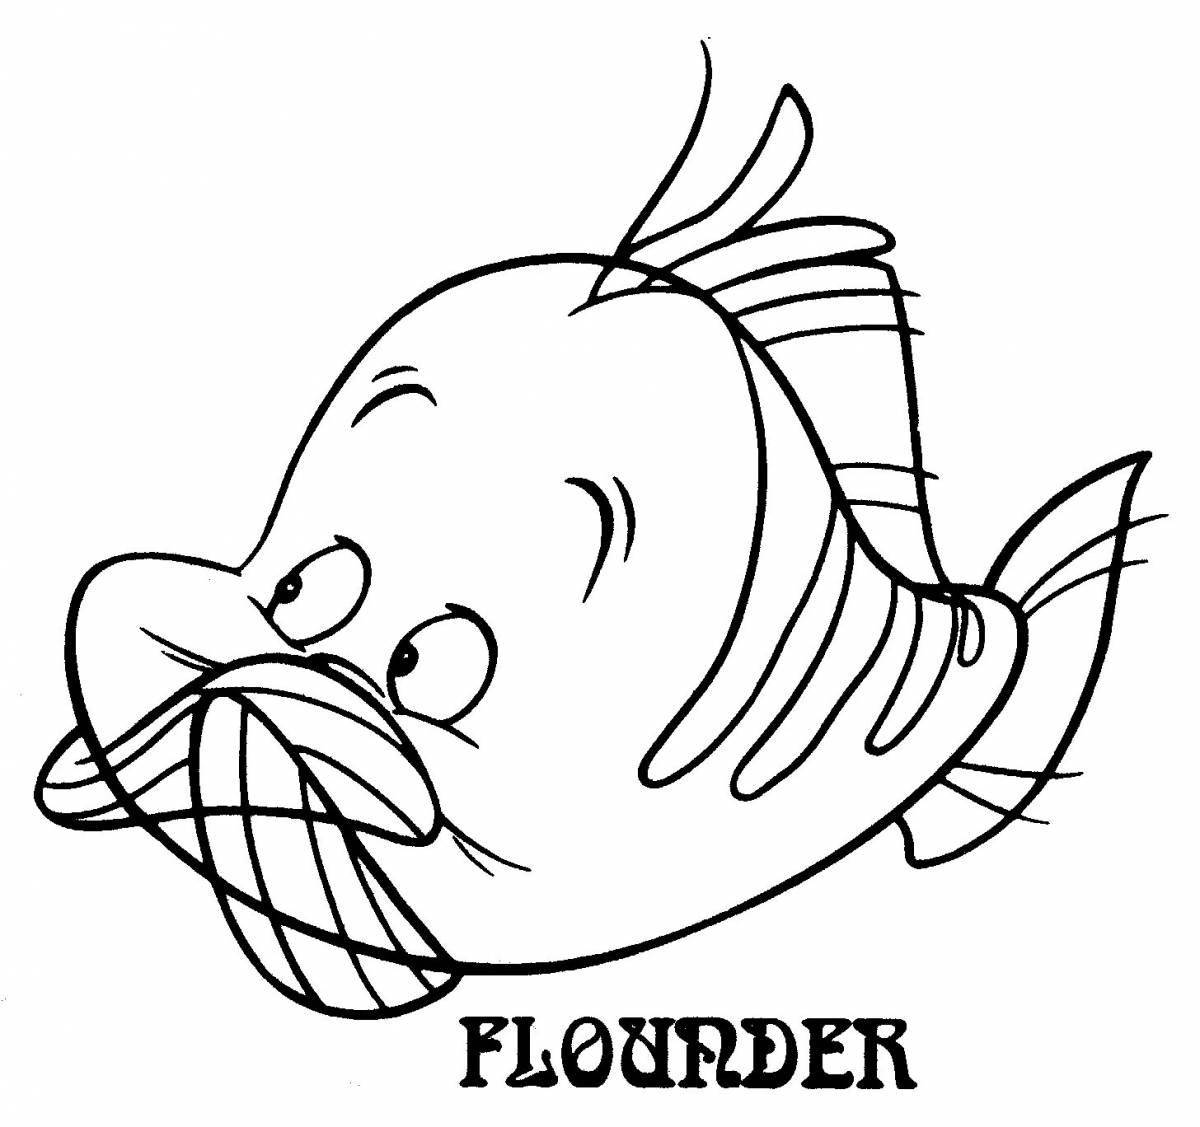 Color-feverish floater coloring page